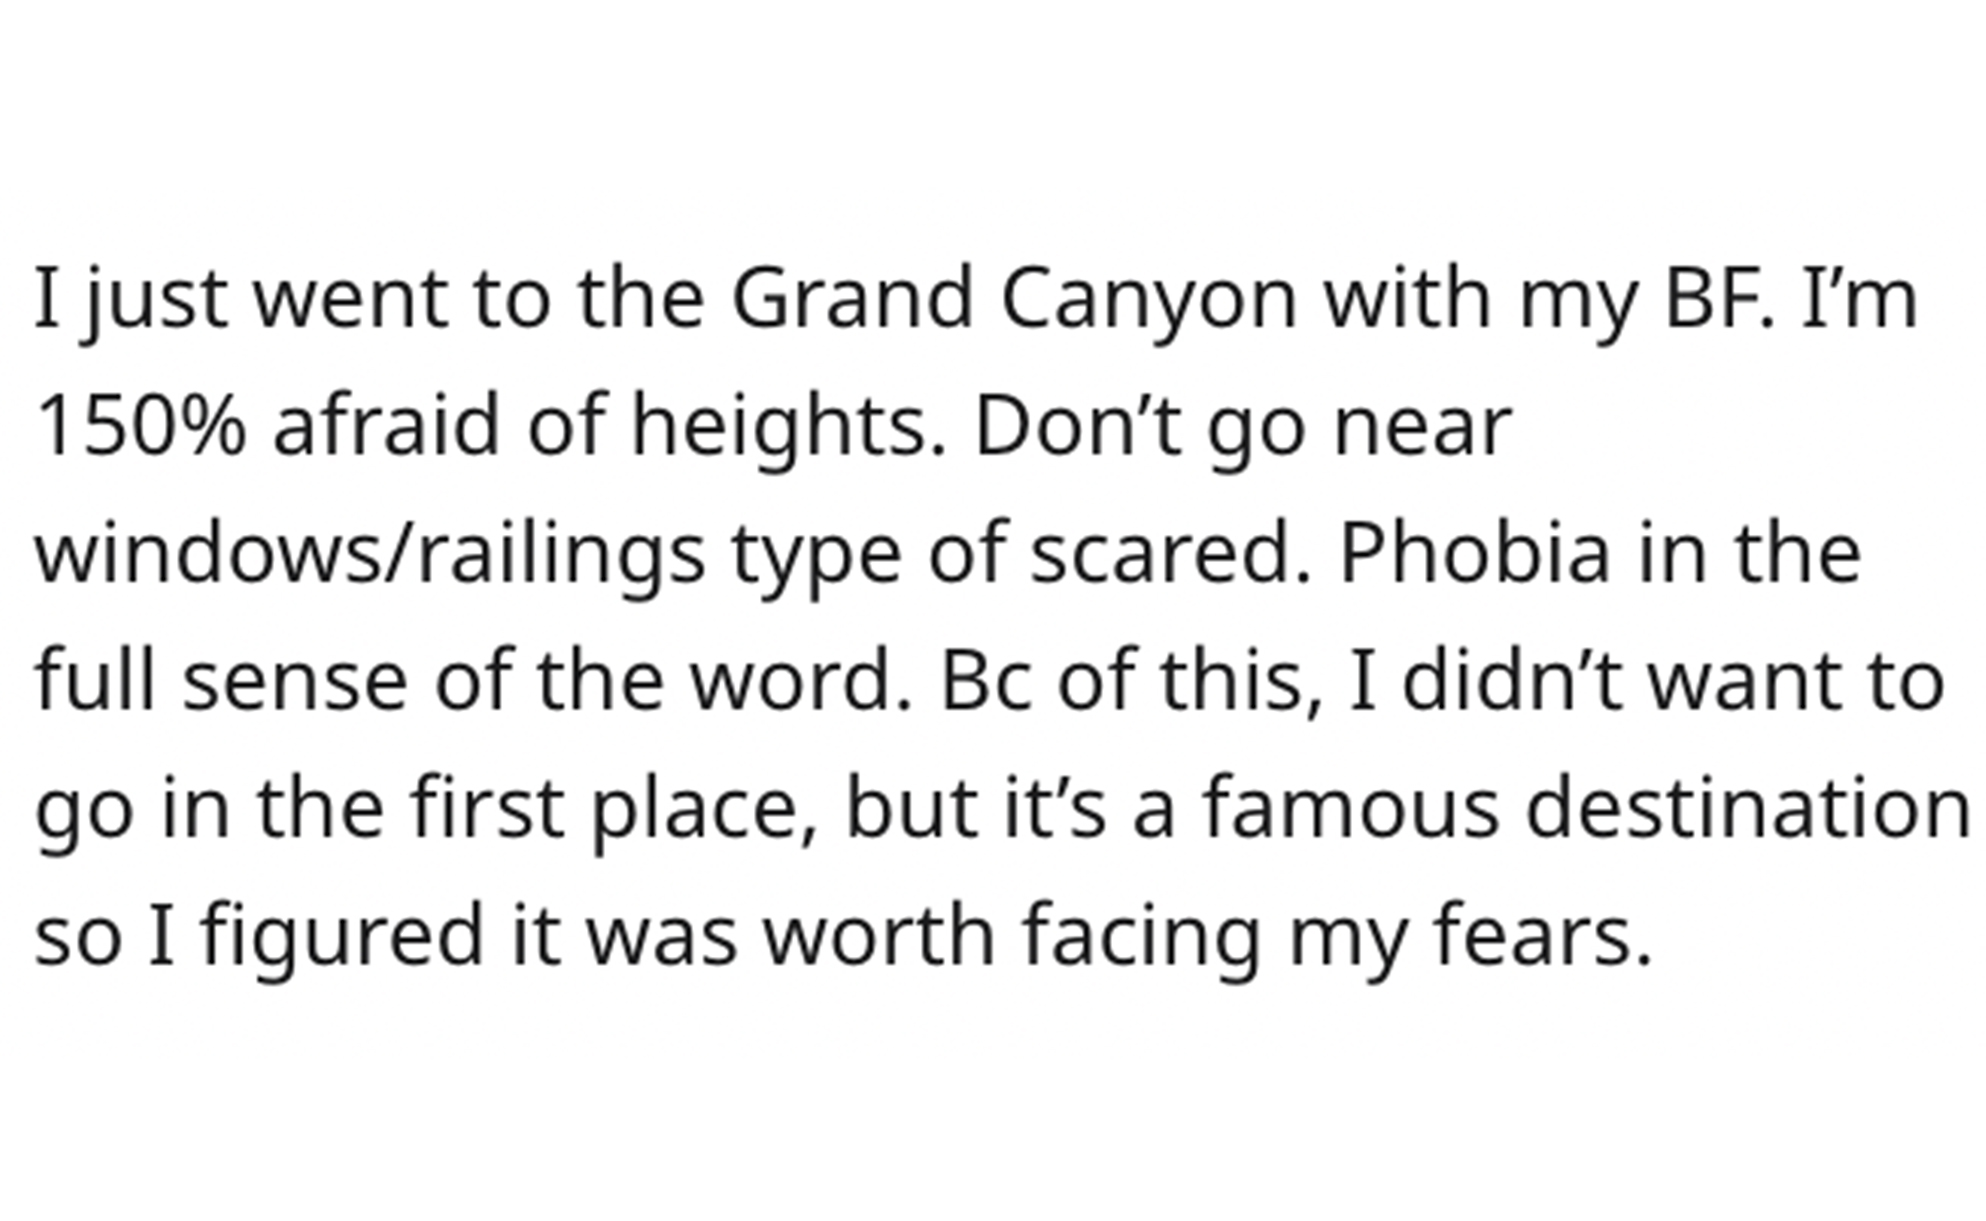 GF leaves BF at Grand Canyon - paper - I just went to the Grand Canyon with my Bf. I'm 150% afraid of heights. Don't go near windowsrailings type of scared. Phobia in the full sense of the word. Bc of this, I didn't want to go in the first place, but it's